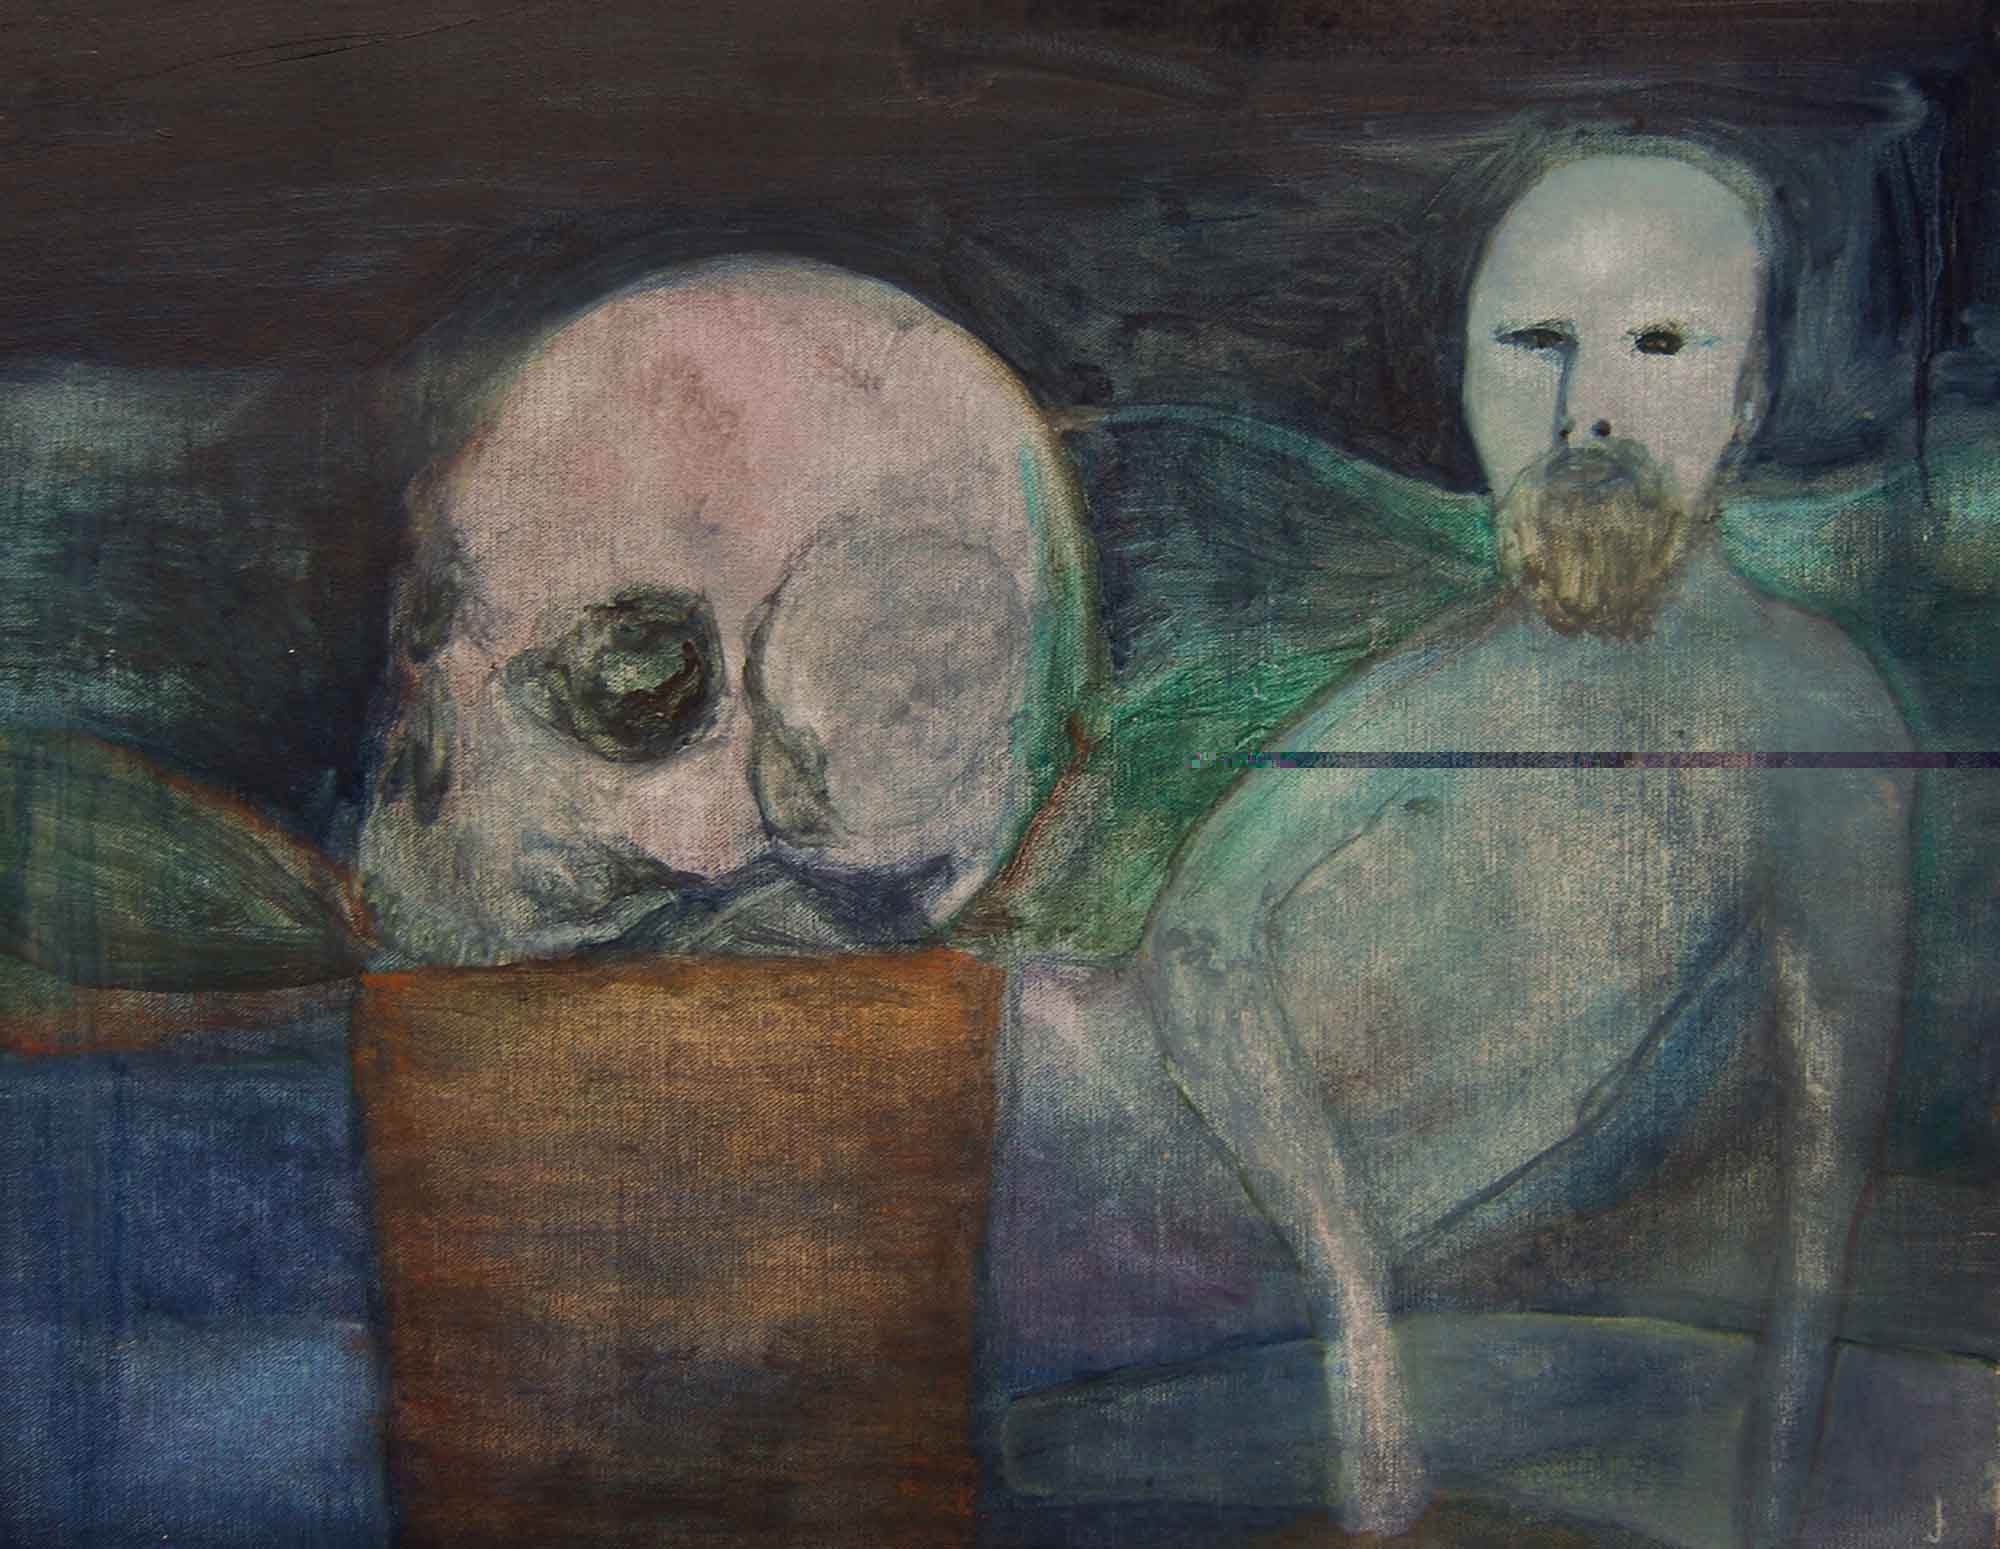  Justin Williams,&nbsp; Doig with Skull , 2014, oil and raw pigment on canvas, 51 x 63cm 